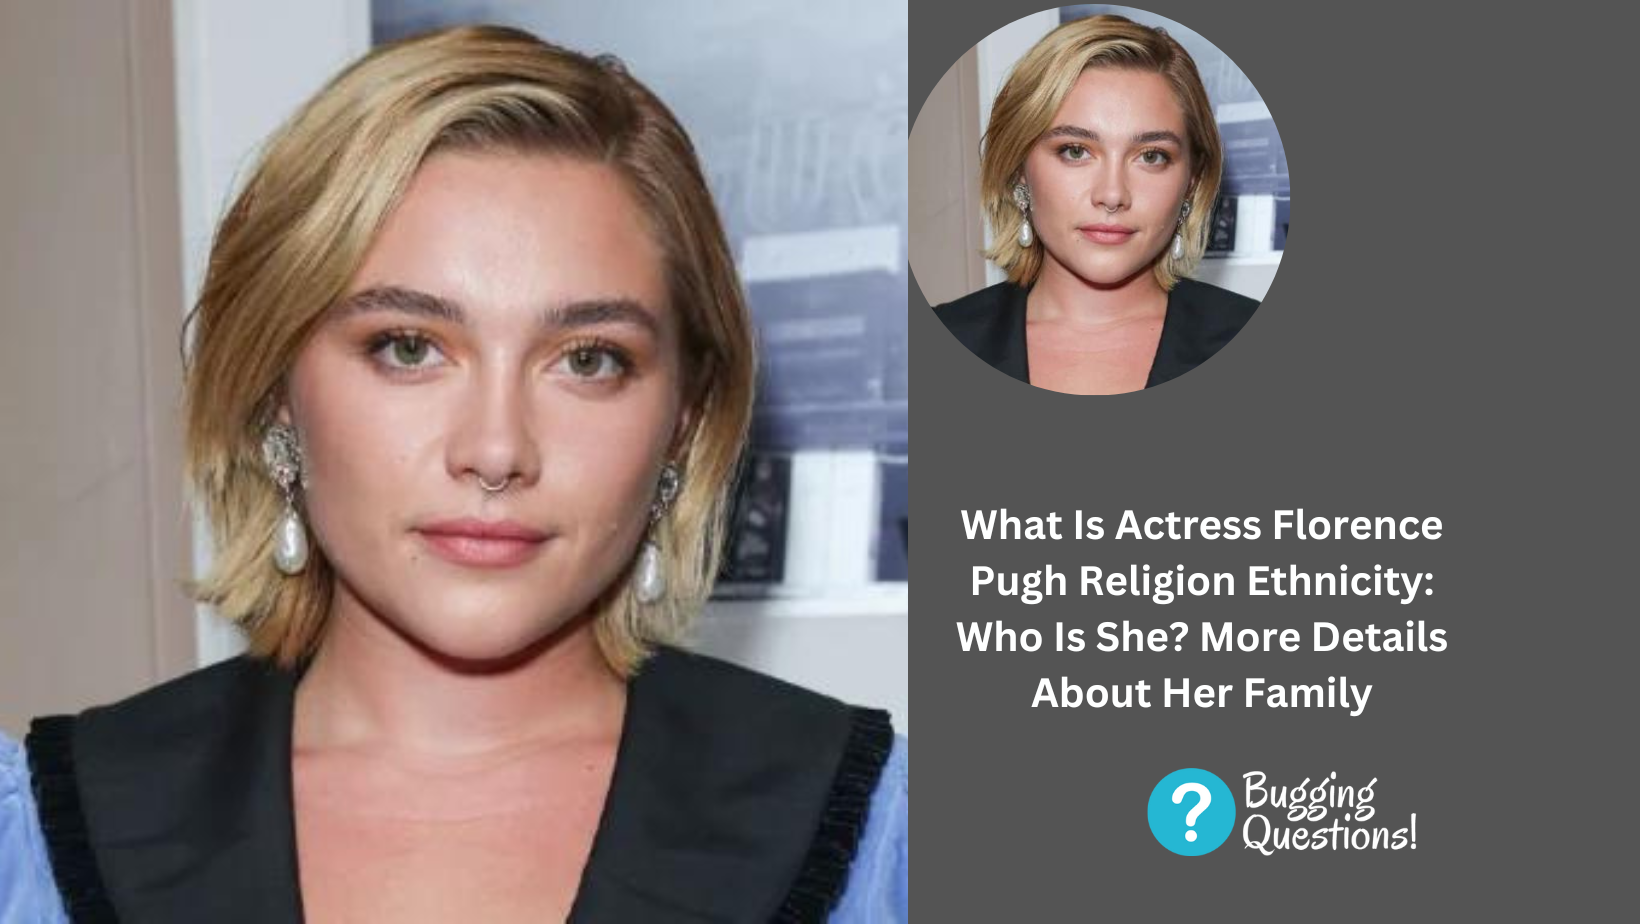 What Is Actress Florence Pugh Religion Ethnicity: Who Is She? More Details About Her Family